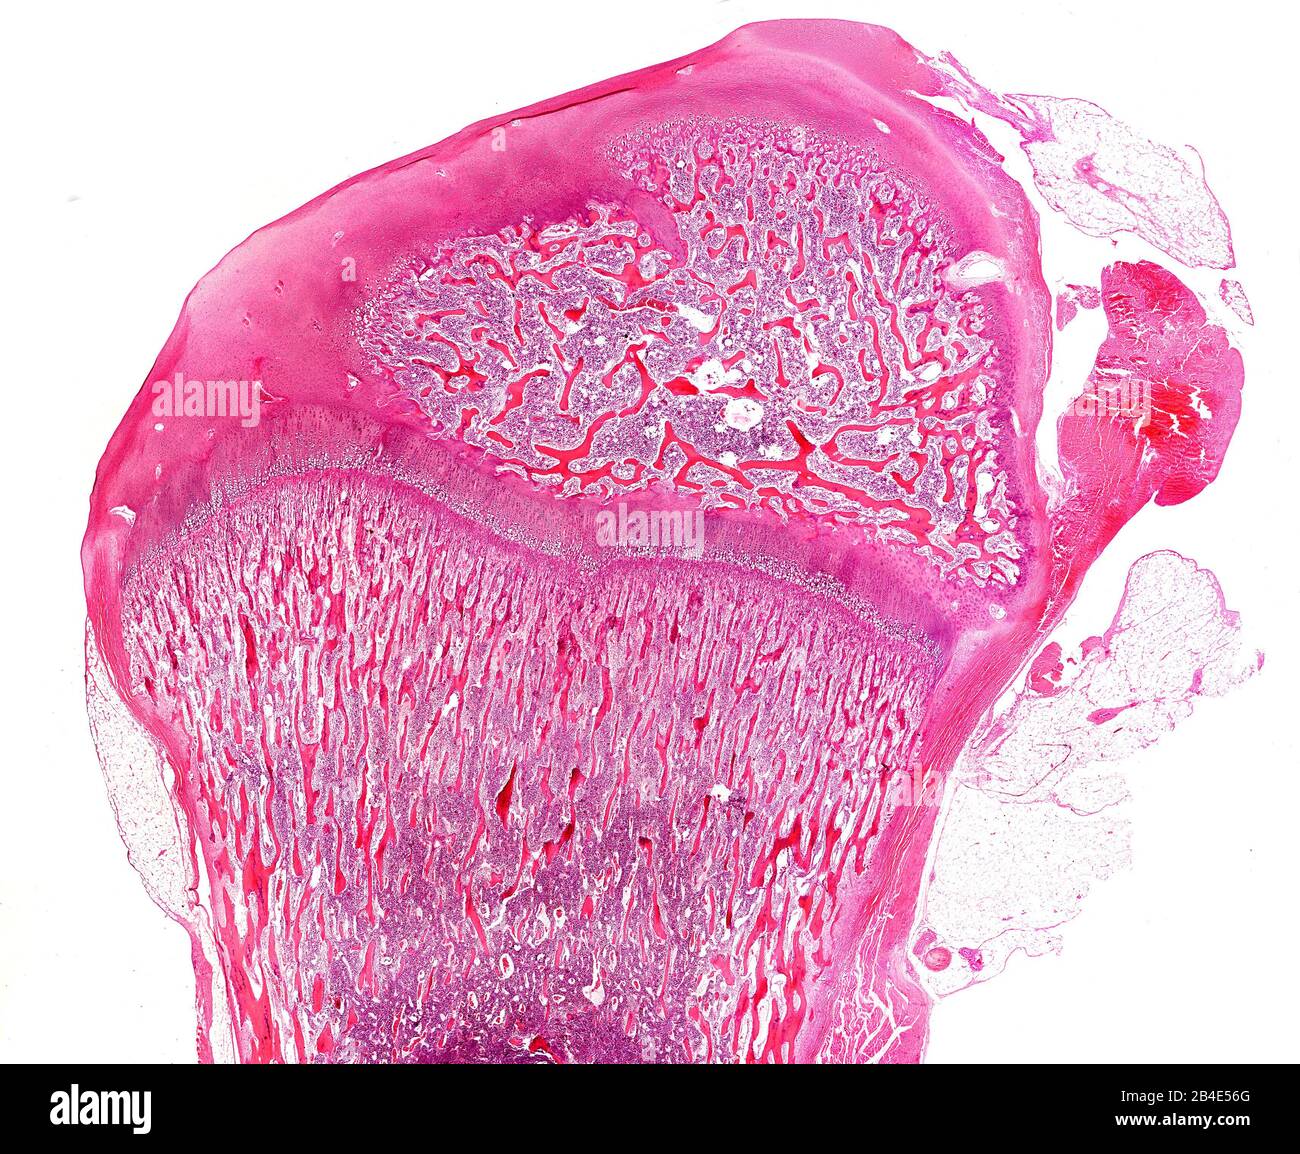 Epiphysis of a developing long bone. A growth plate is located between the primary (down) and secondary (up) ossification centres. Stock Photo